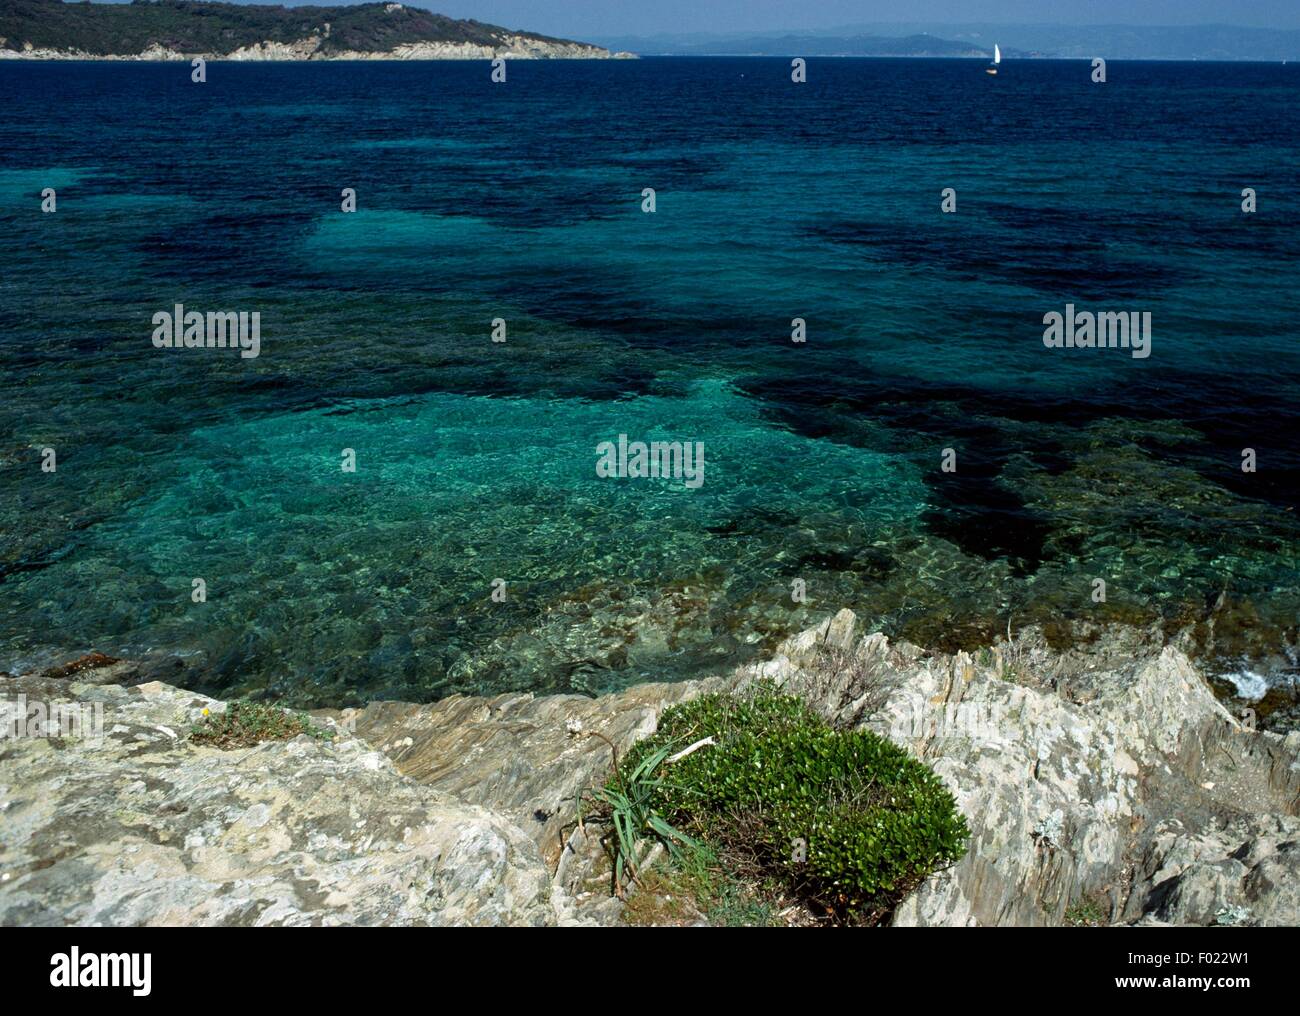 A glimpse of Port-Cros National Park, France. Stock Photo